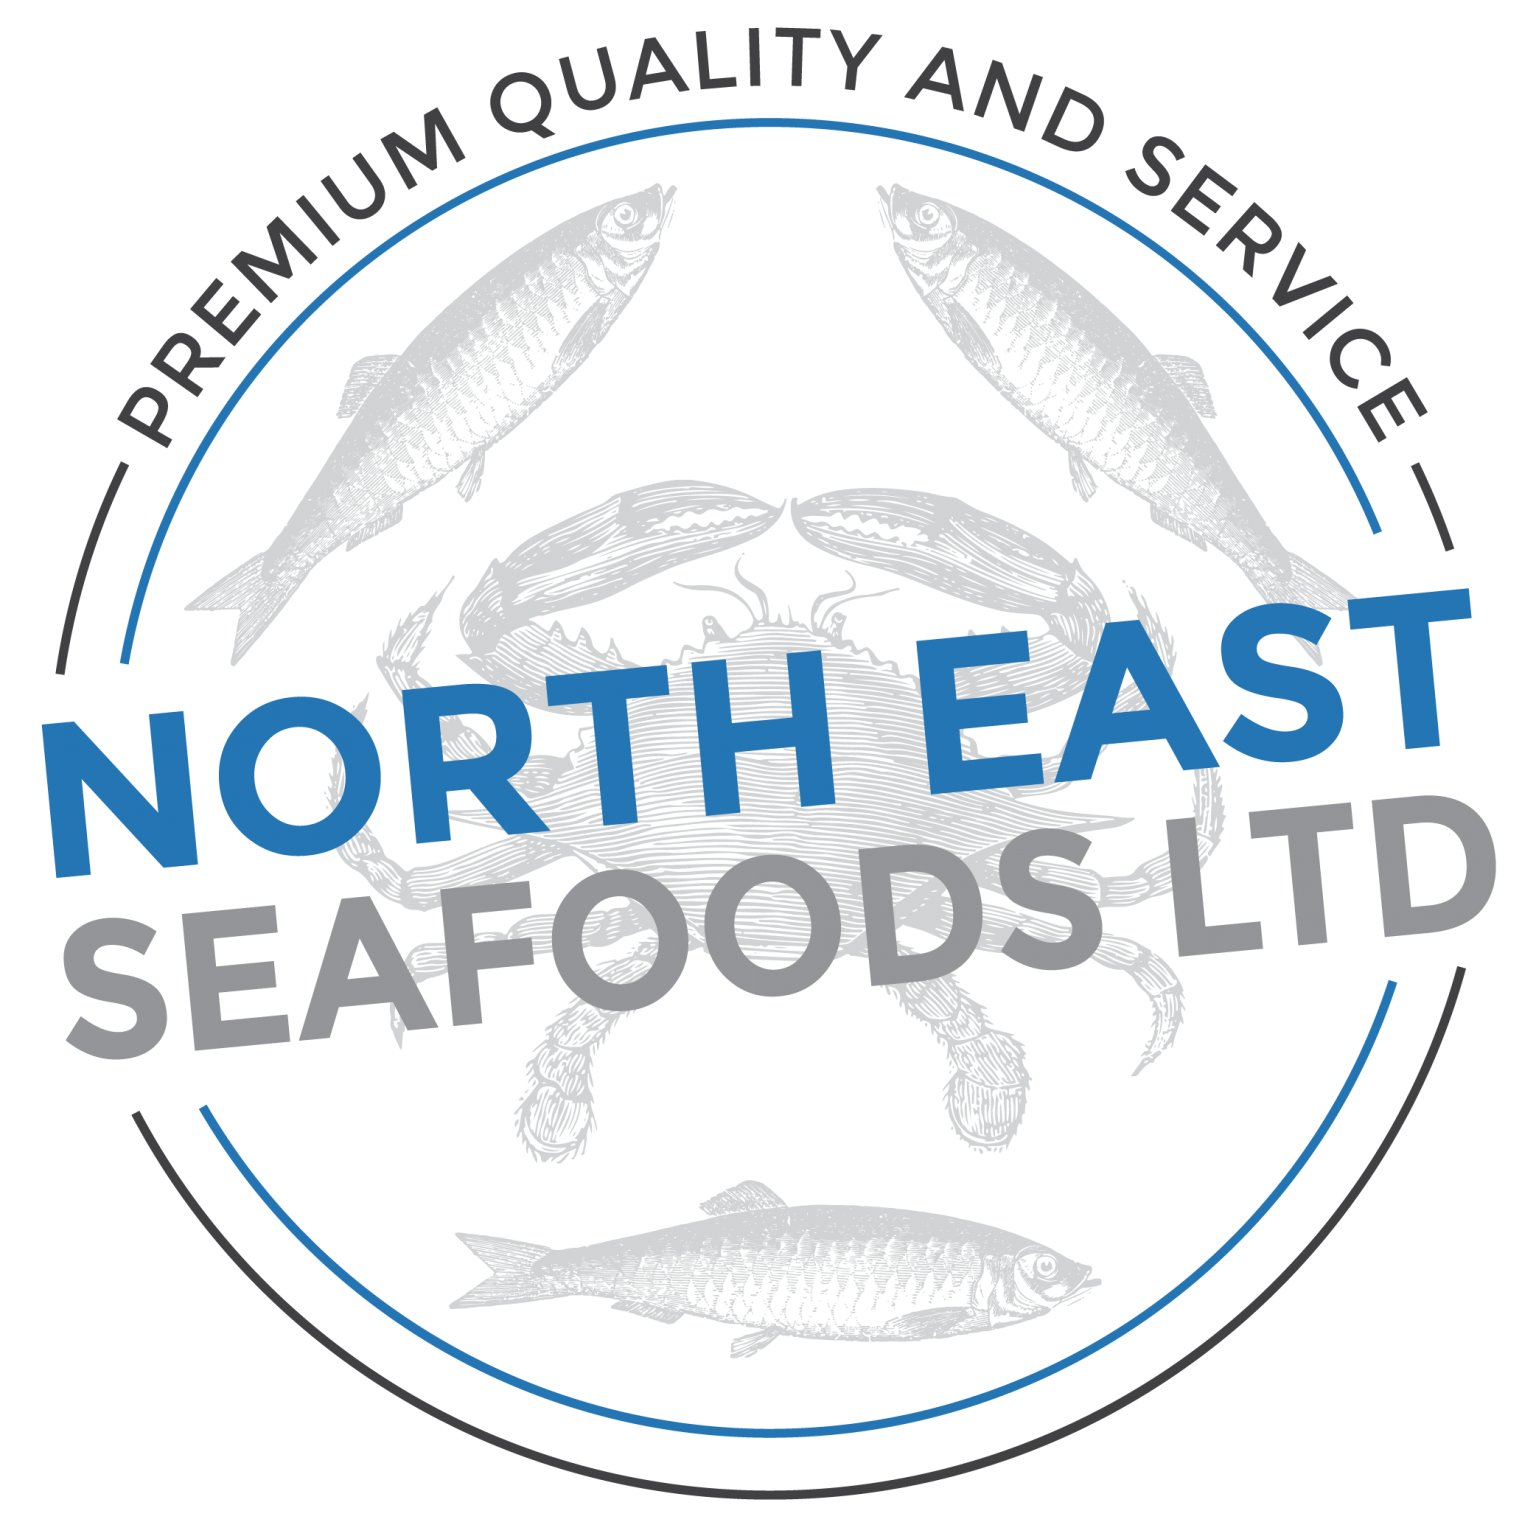 Fresh Fish & Seafood Supplier for Restaurants | North East Seafoods Ltd